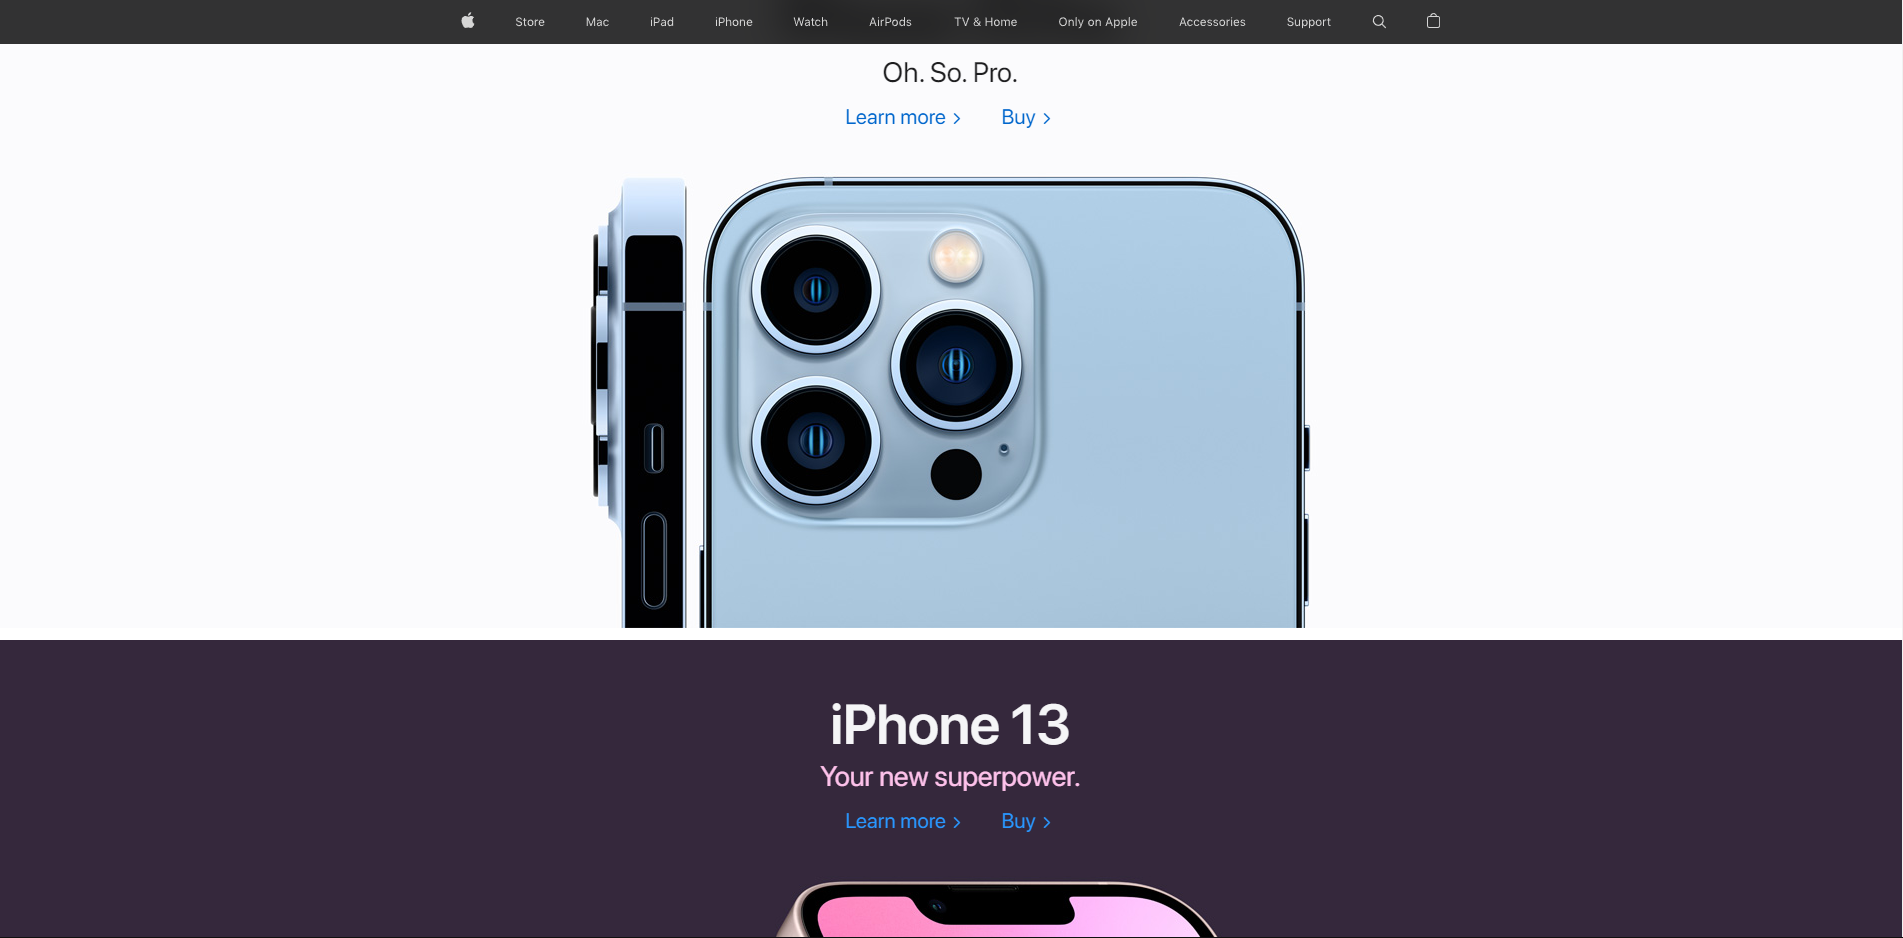 At the top navigation menu bar, we see the standard black that apple is known for. The luxury and power that it holds within its industry. We go down below that to see a white background that will have your attention go to the blue iphone which represents trust, while its supporting its title